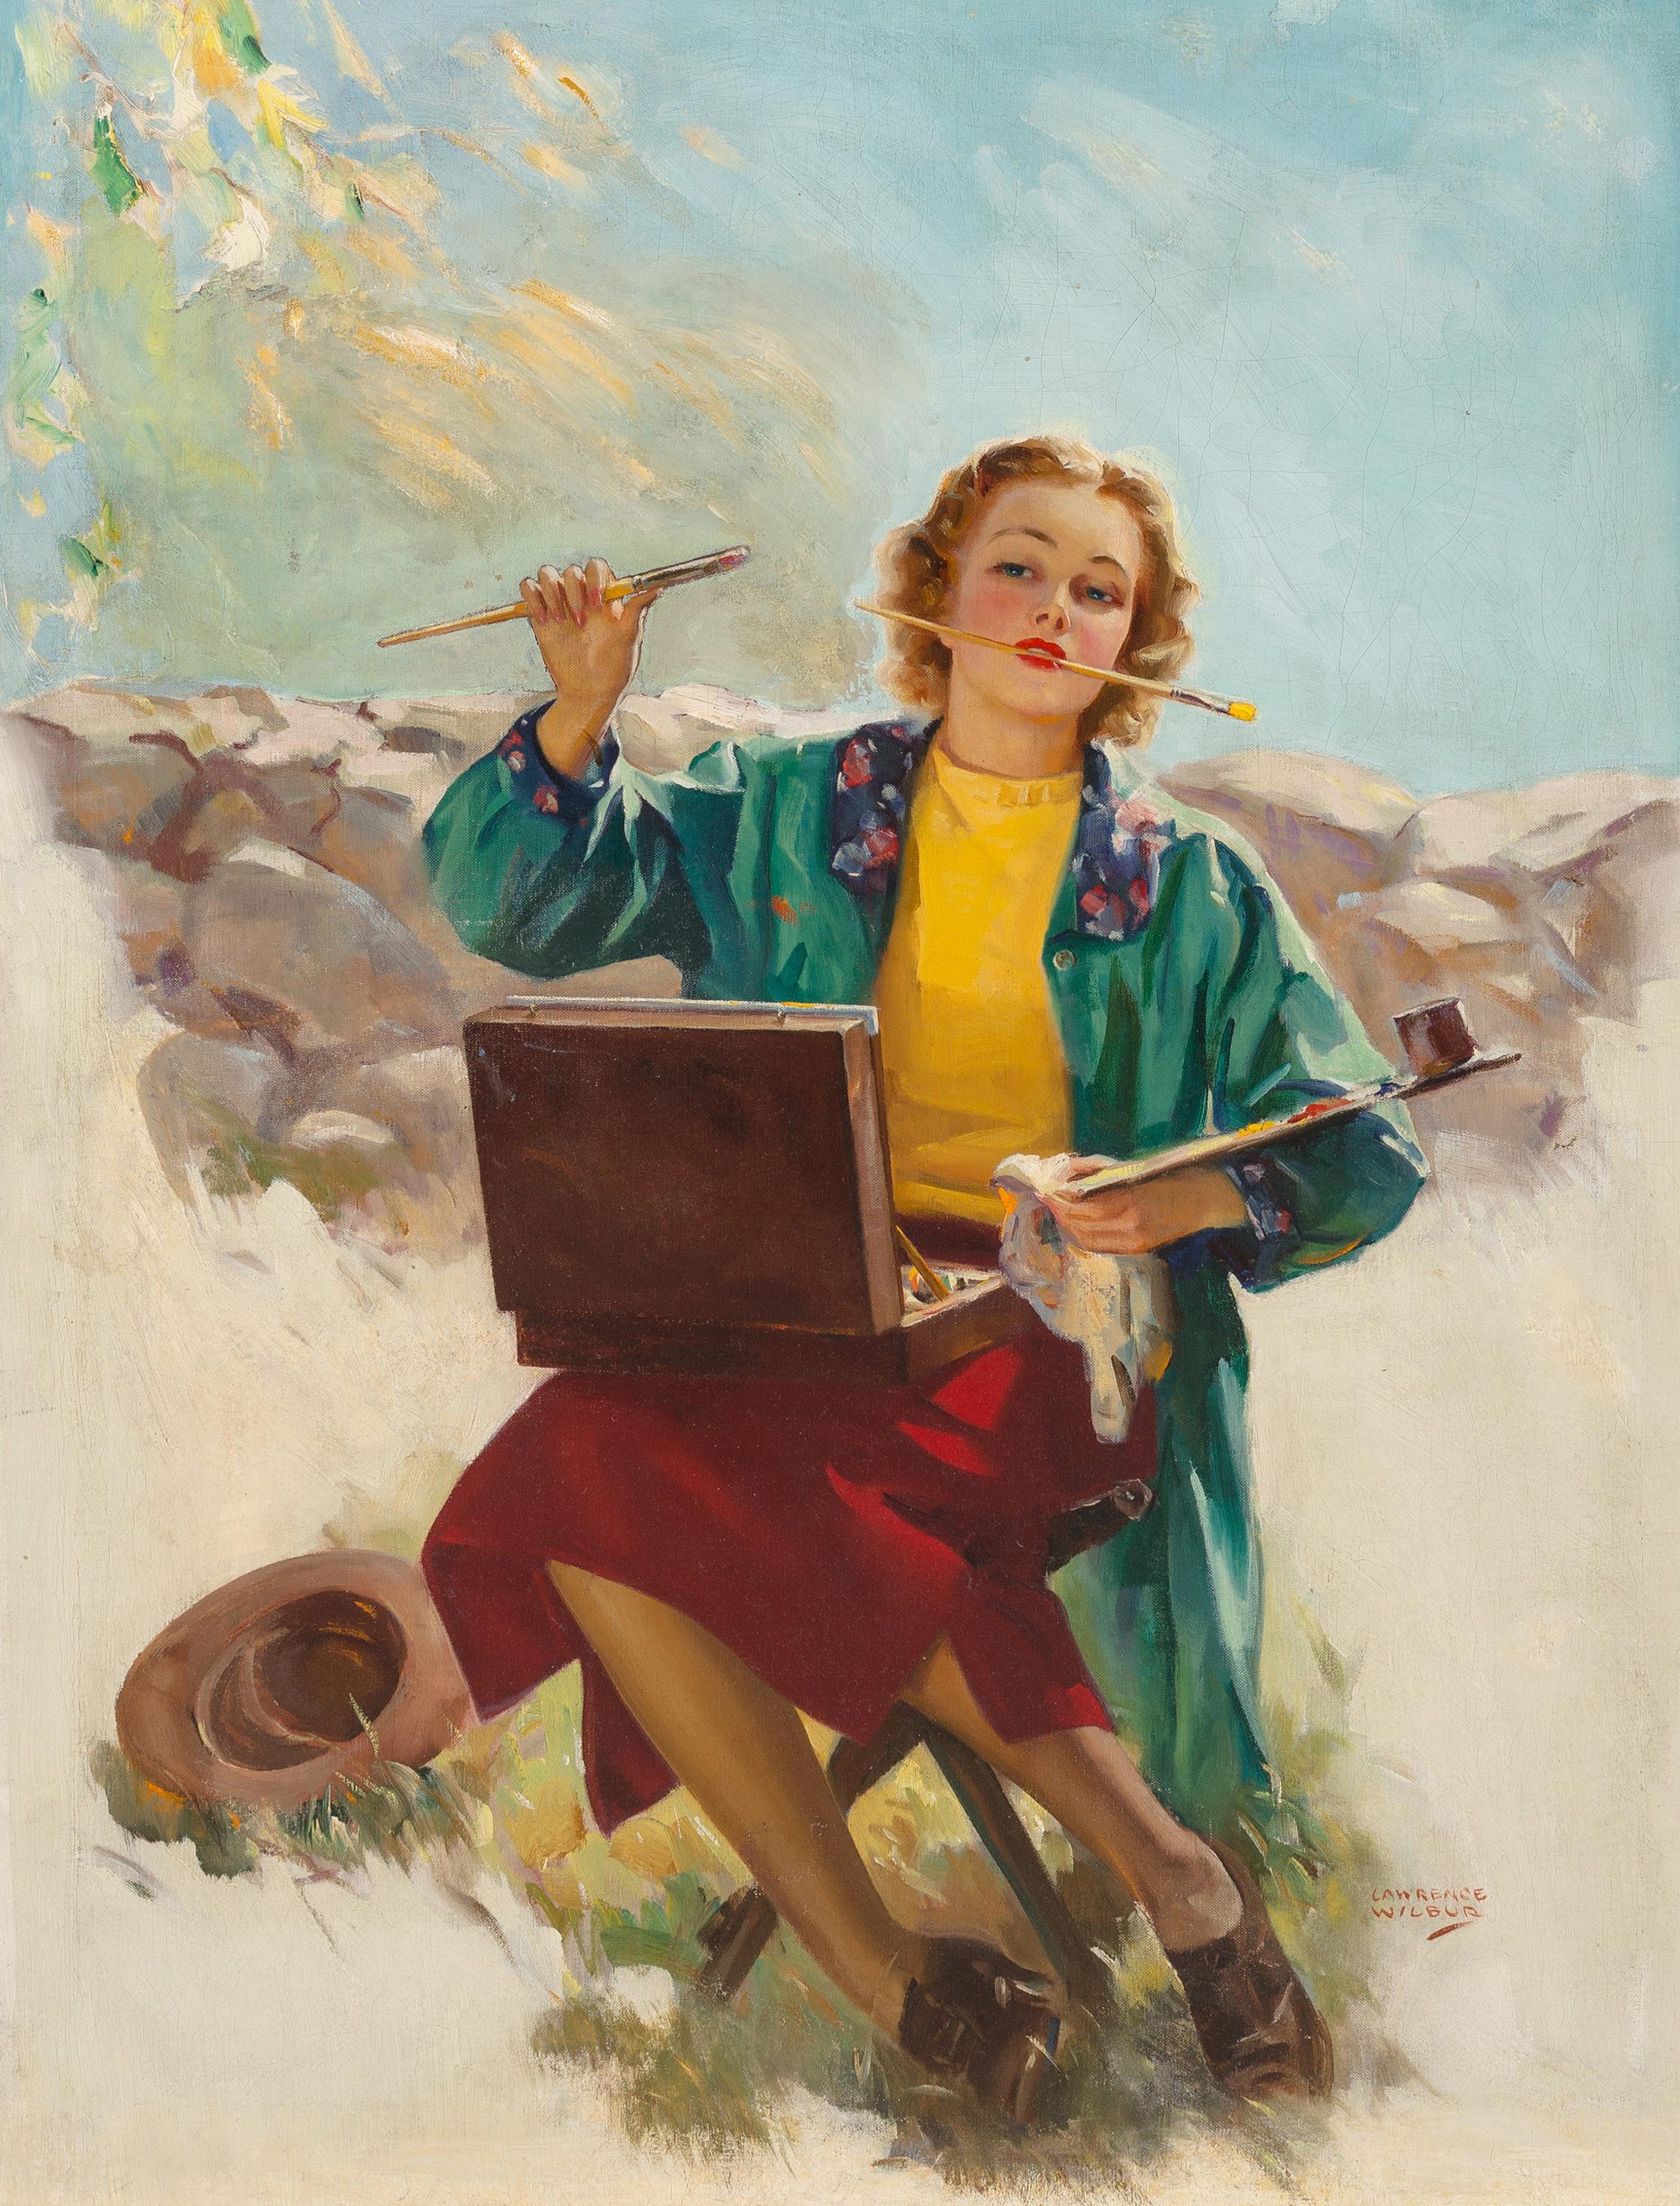 Lawrence Wilbur Figurative Painting - The Artist, This Week Magazine Cover, 1937